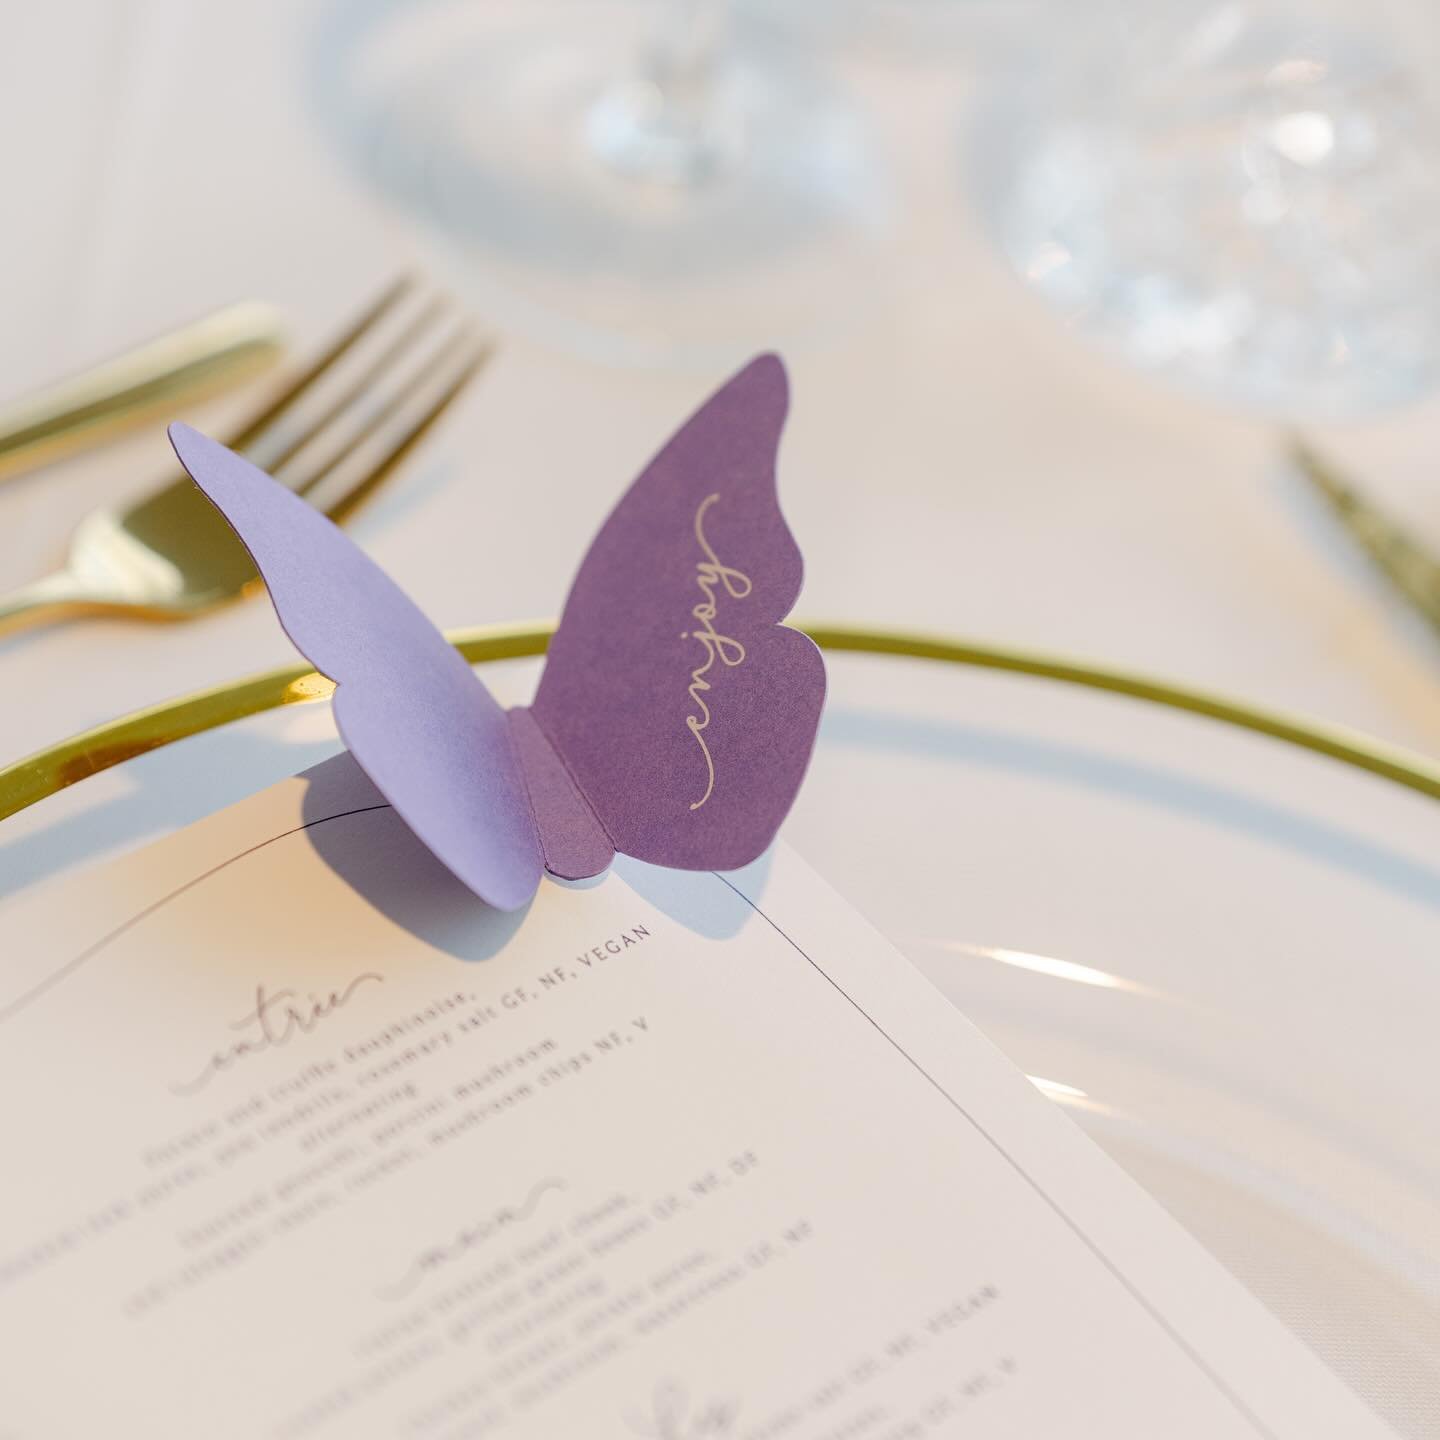 🏆 GALA AWARDS DINNER 🏆

Sprinkling a little magic on your feed with fluttering butterfly place cards 🦋 designed by the talented @adelphimou👌

Why butterflies? 
This total wellbeing global organisation is all about helping individuals transform th